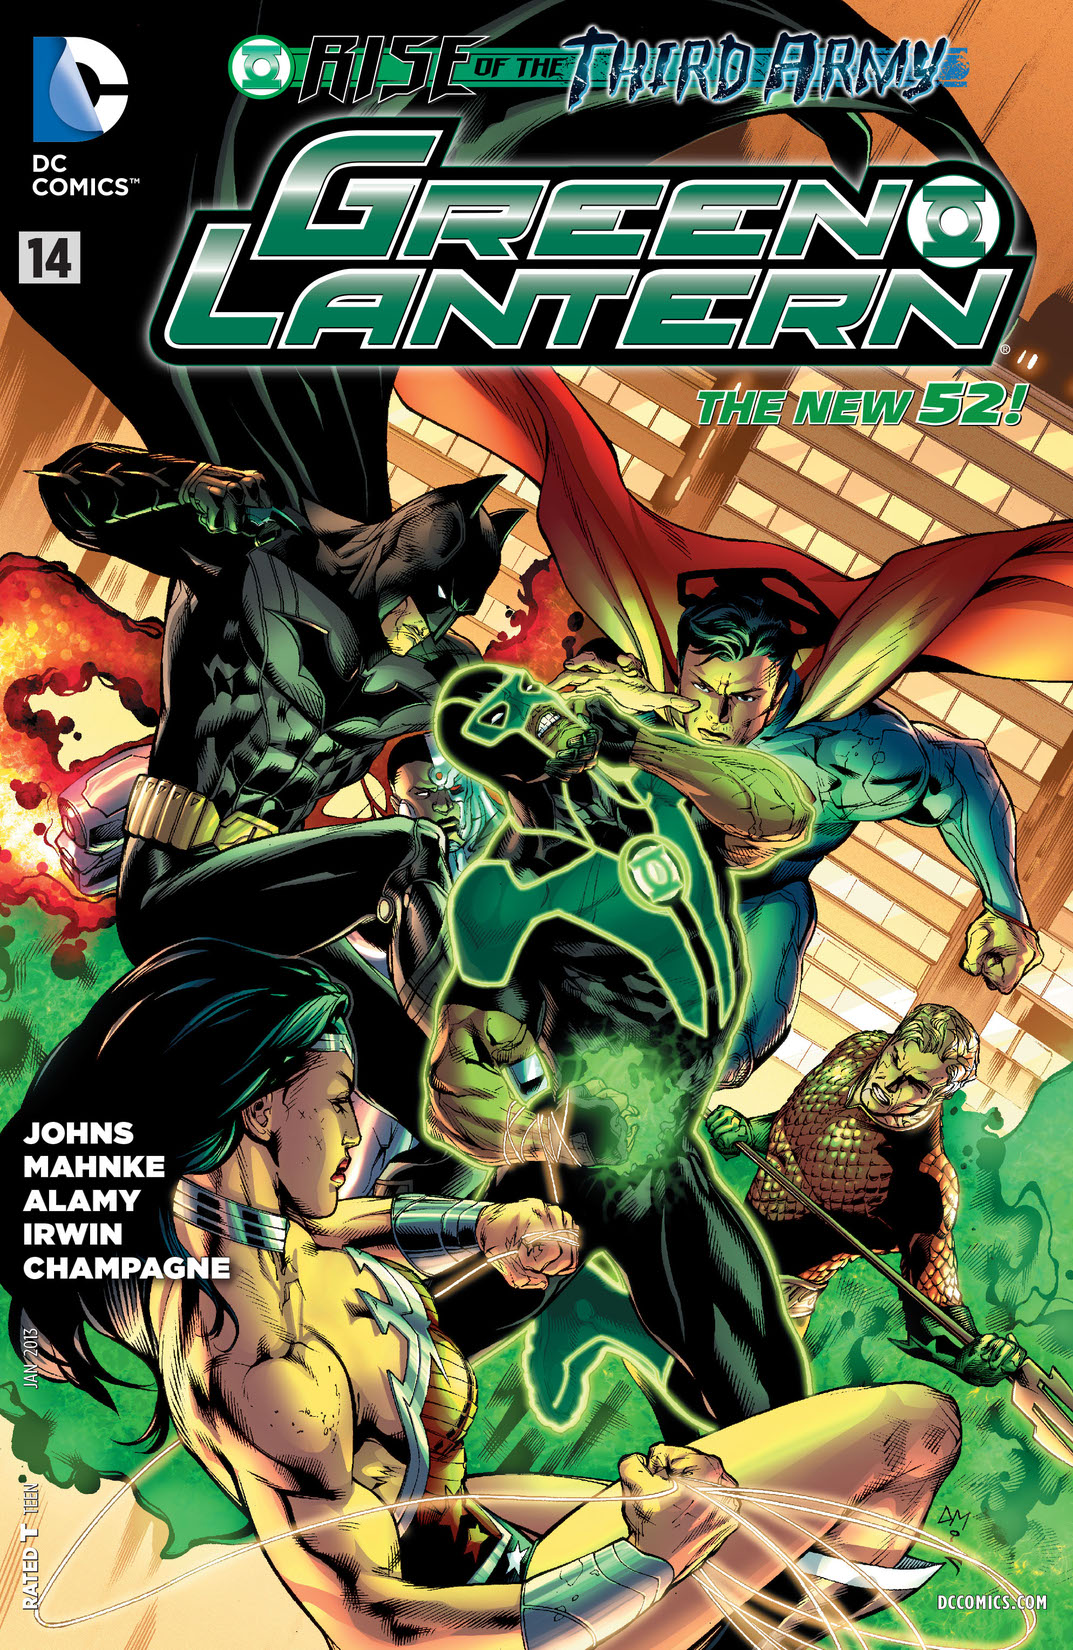 Green Lantern (2011-) #14 preview images